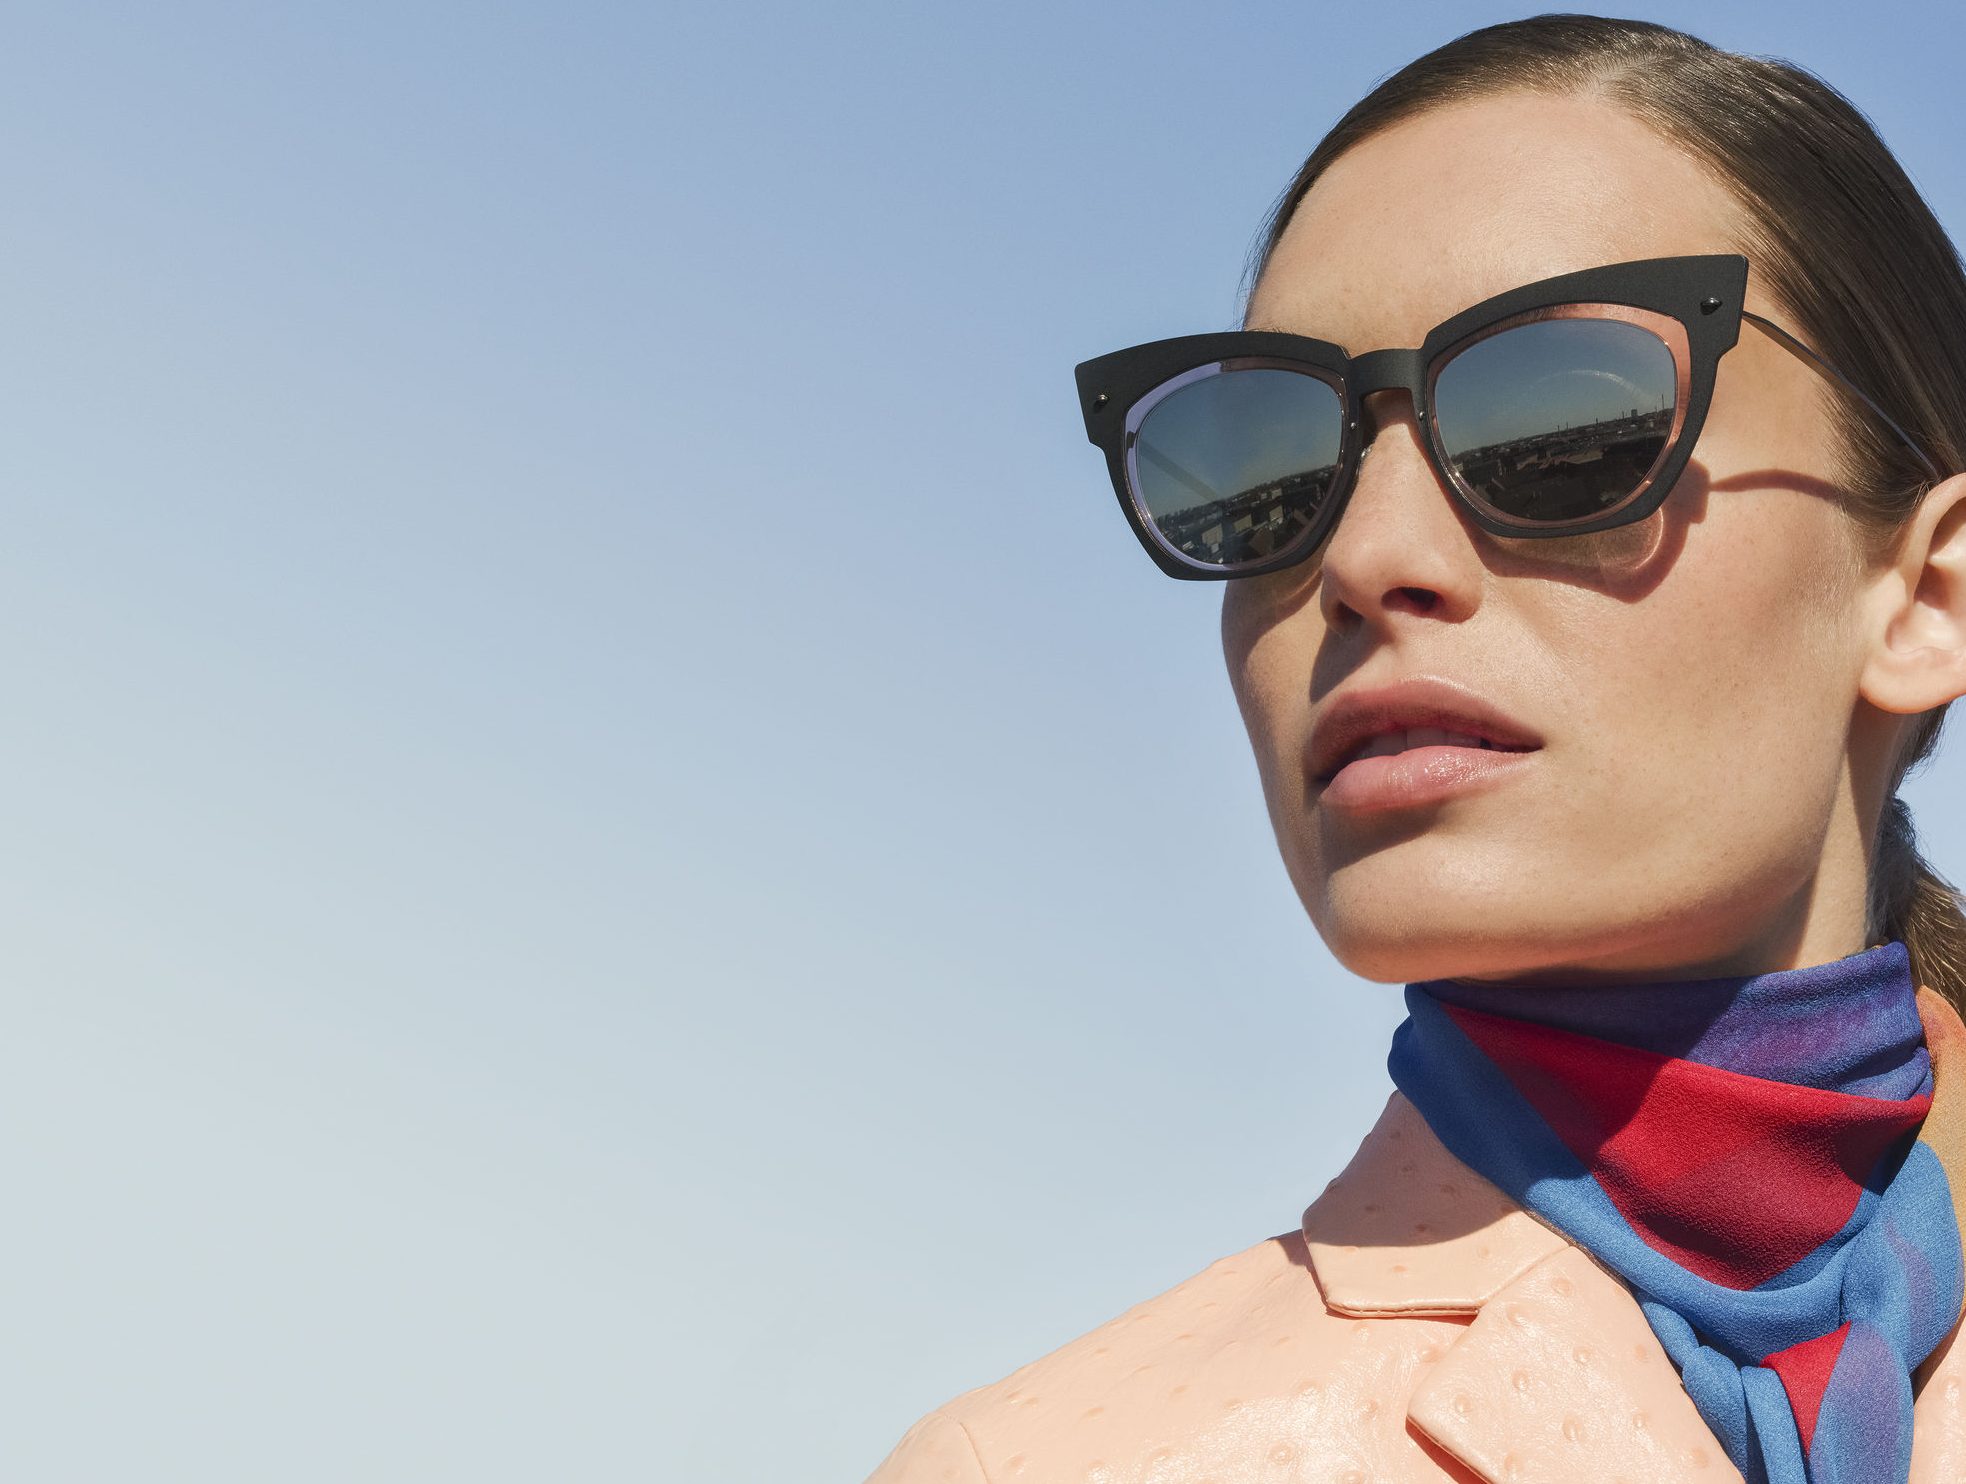 Kering Group Sued Over “Made in Italy” Eyewear Claims – The